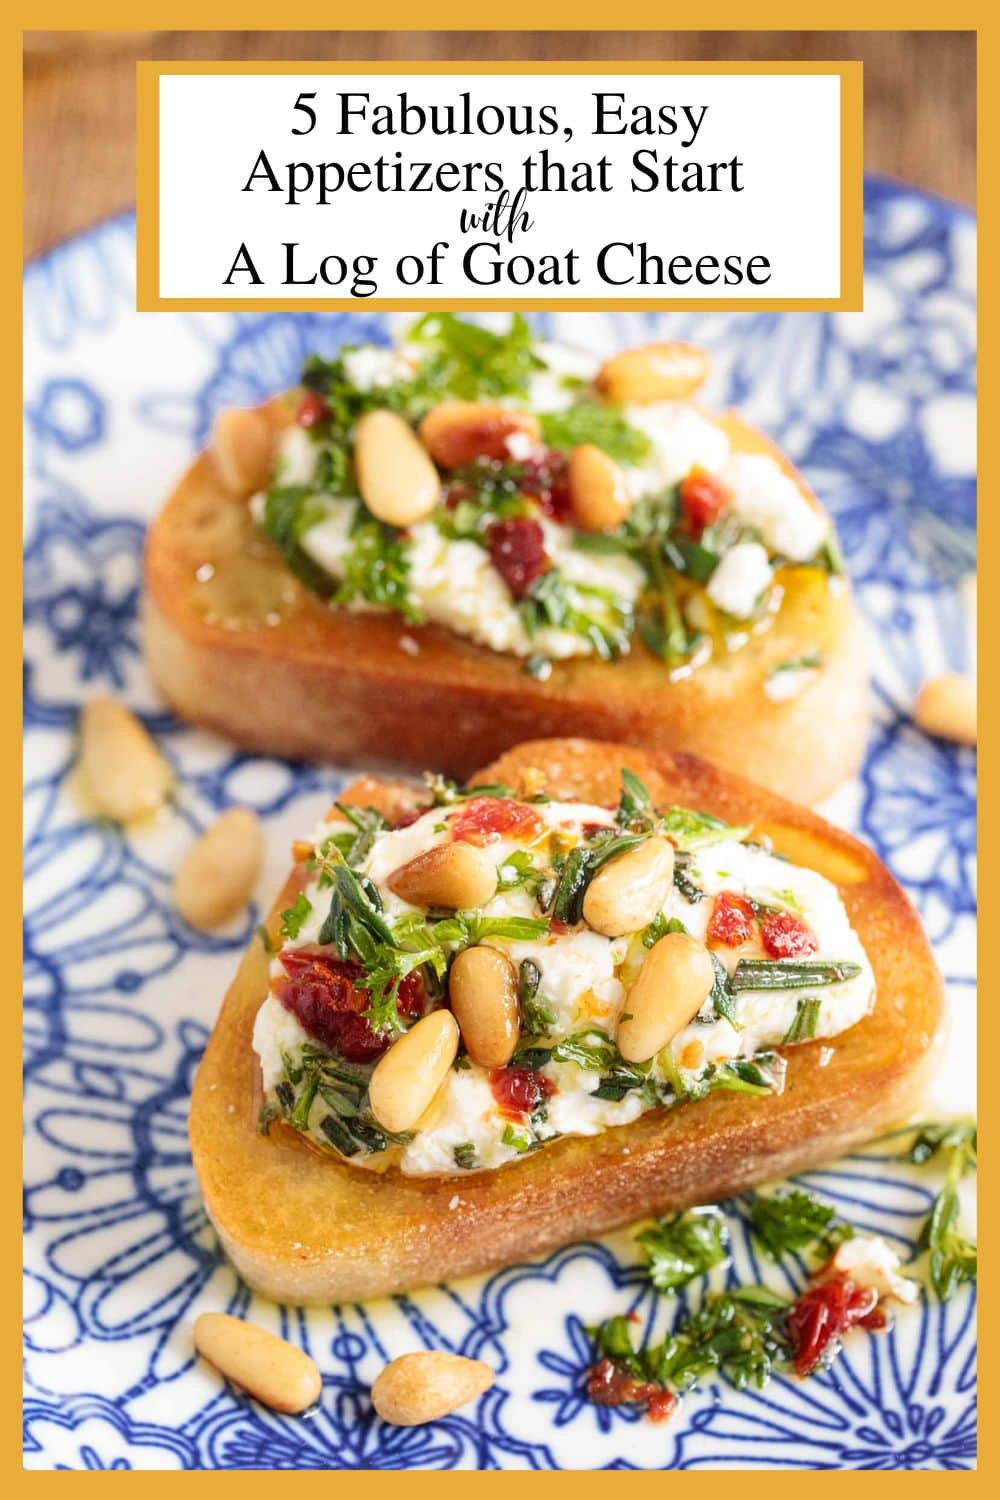 5 Fabulous (Easy) Appetizers that Start With a Log of Goat Cheese